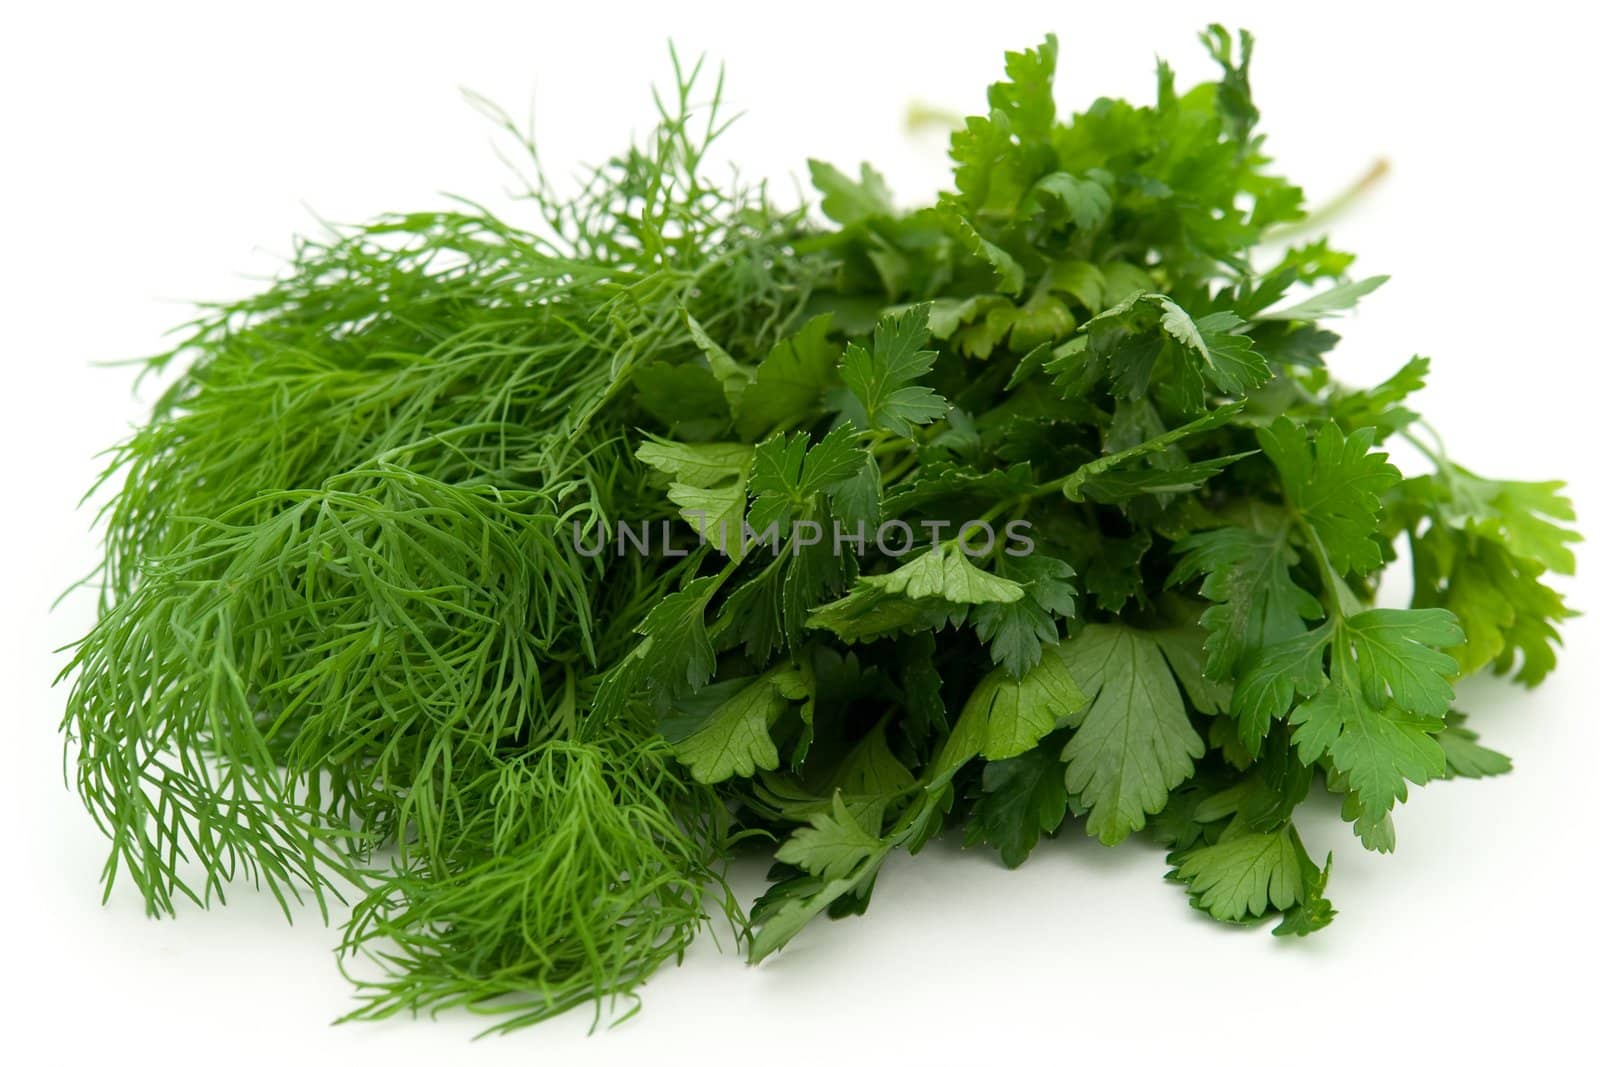 Fresh green dill and parsley on a white background